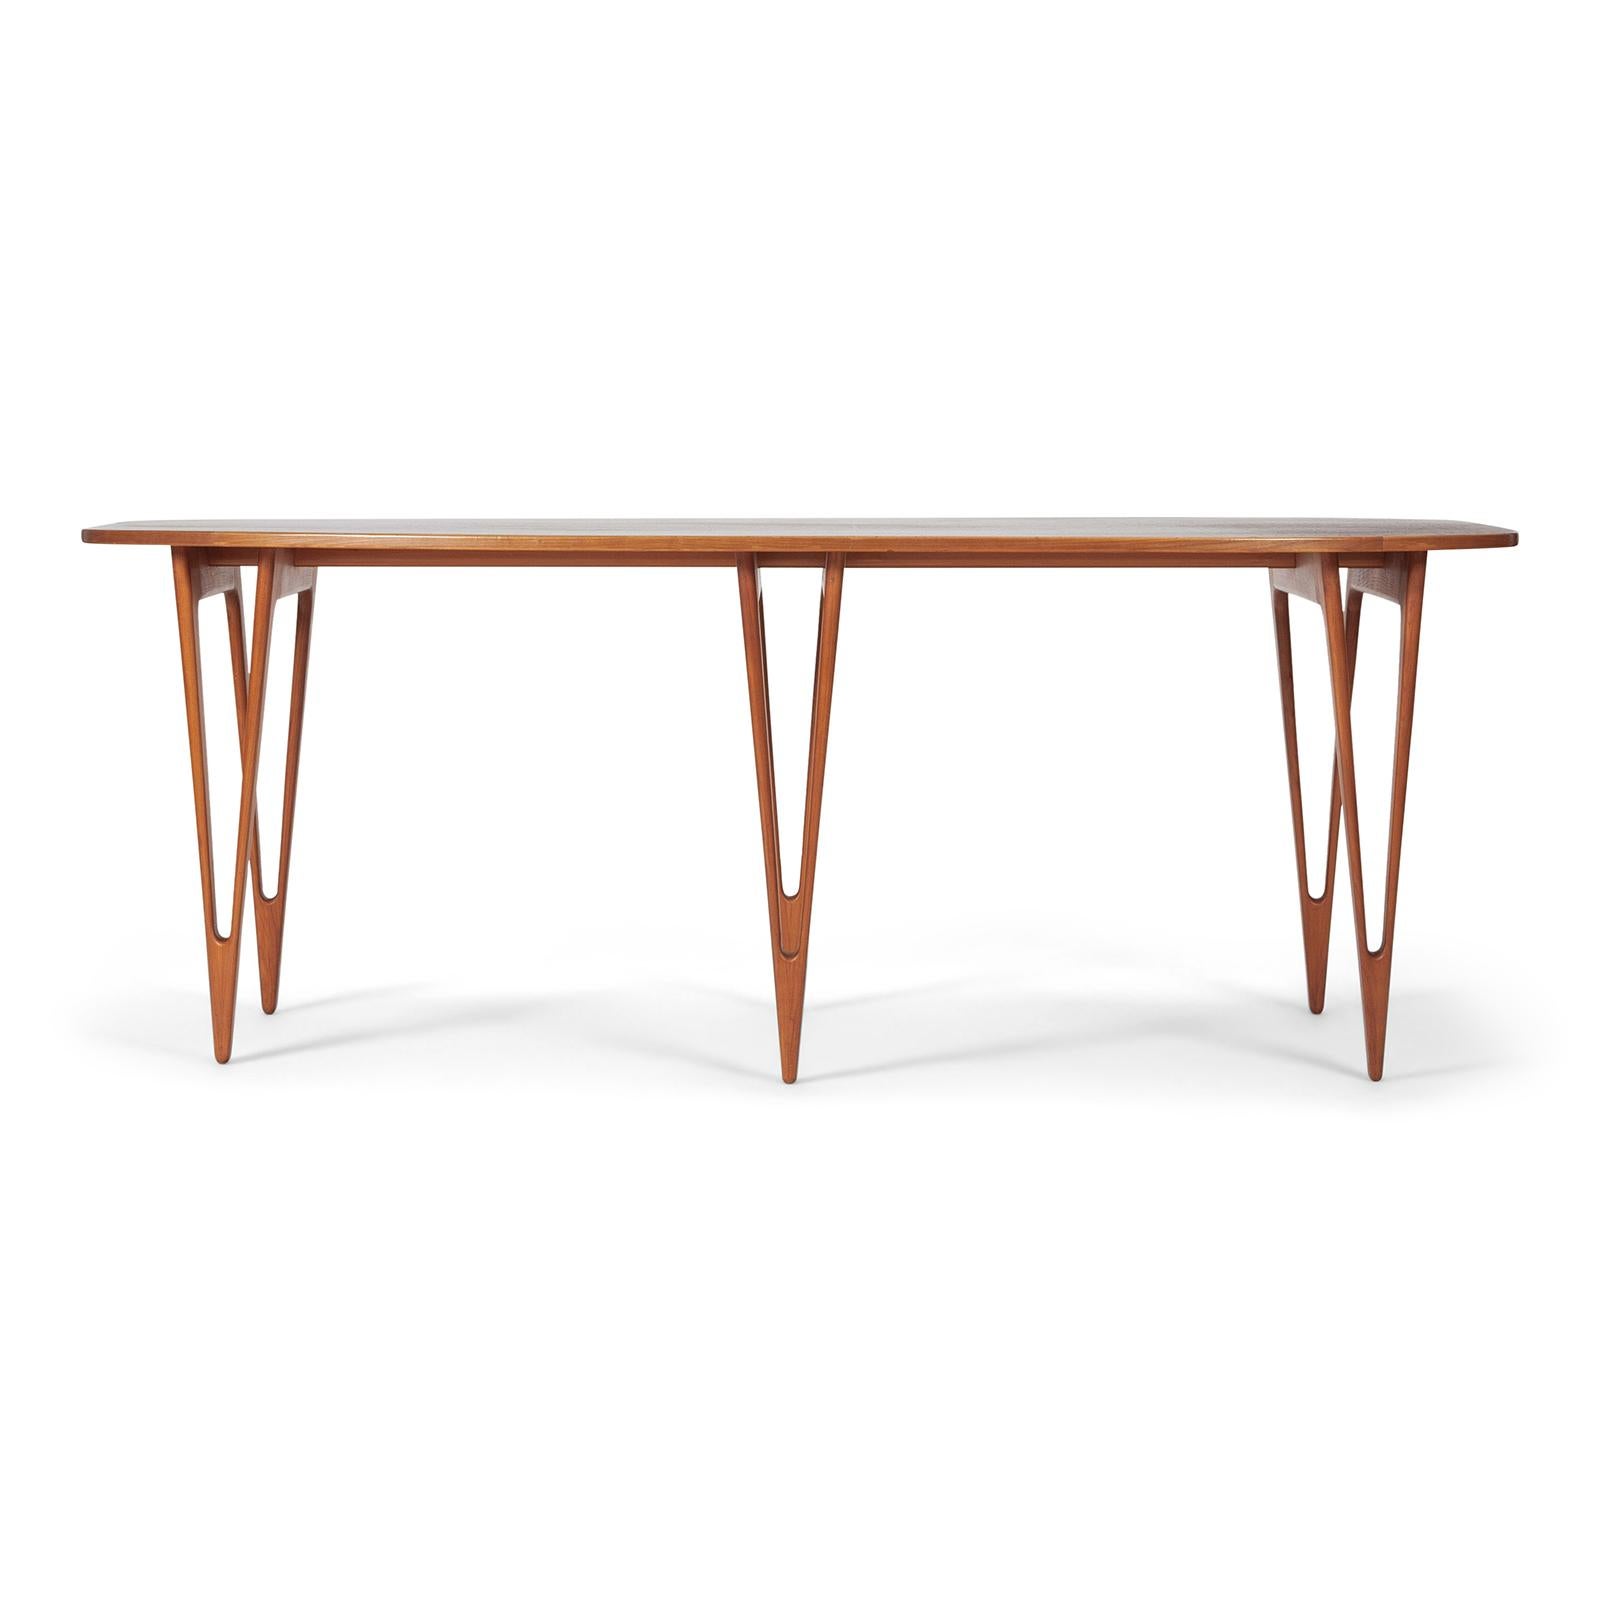 A rare and early console table designed by Børge Mogensen in 1949. Made by master cabinetmaker Erhard Rasmussen, Denmark.
The highly sculptural table has a top in Vavona burl wood on a base of cherrywood. It was shown at The Copenhagen